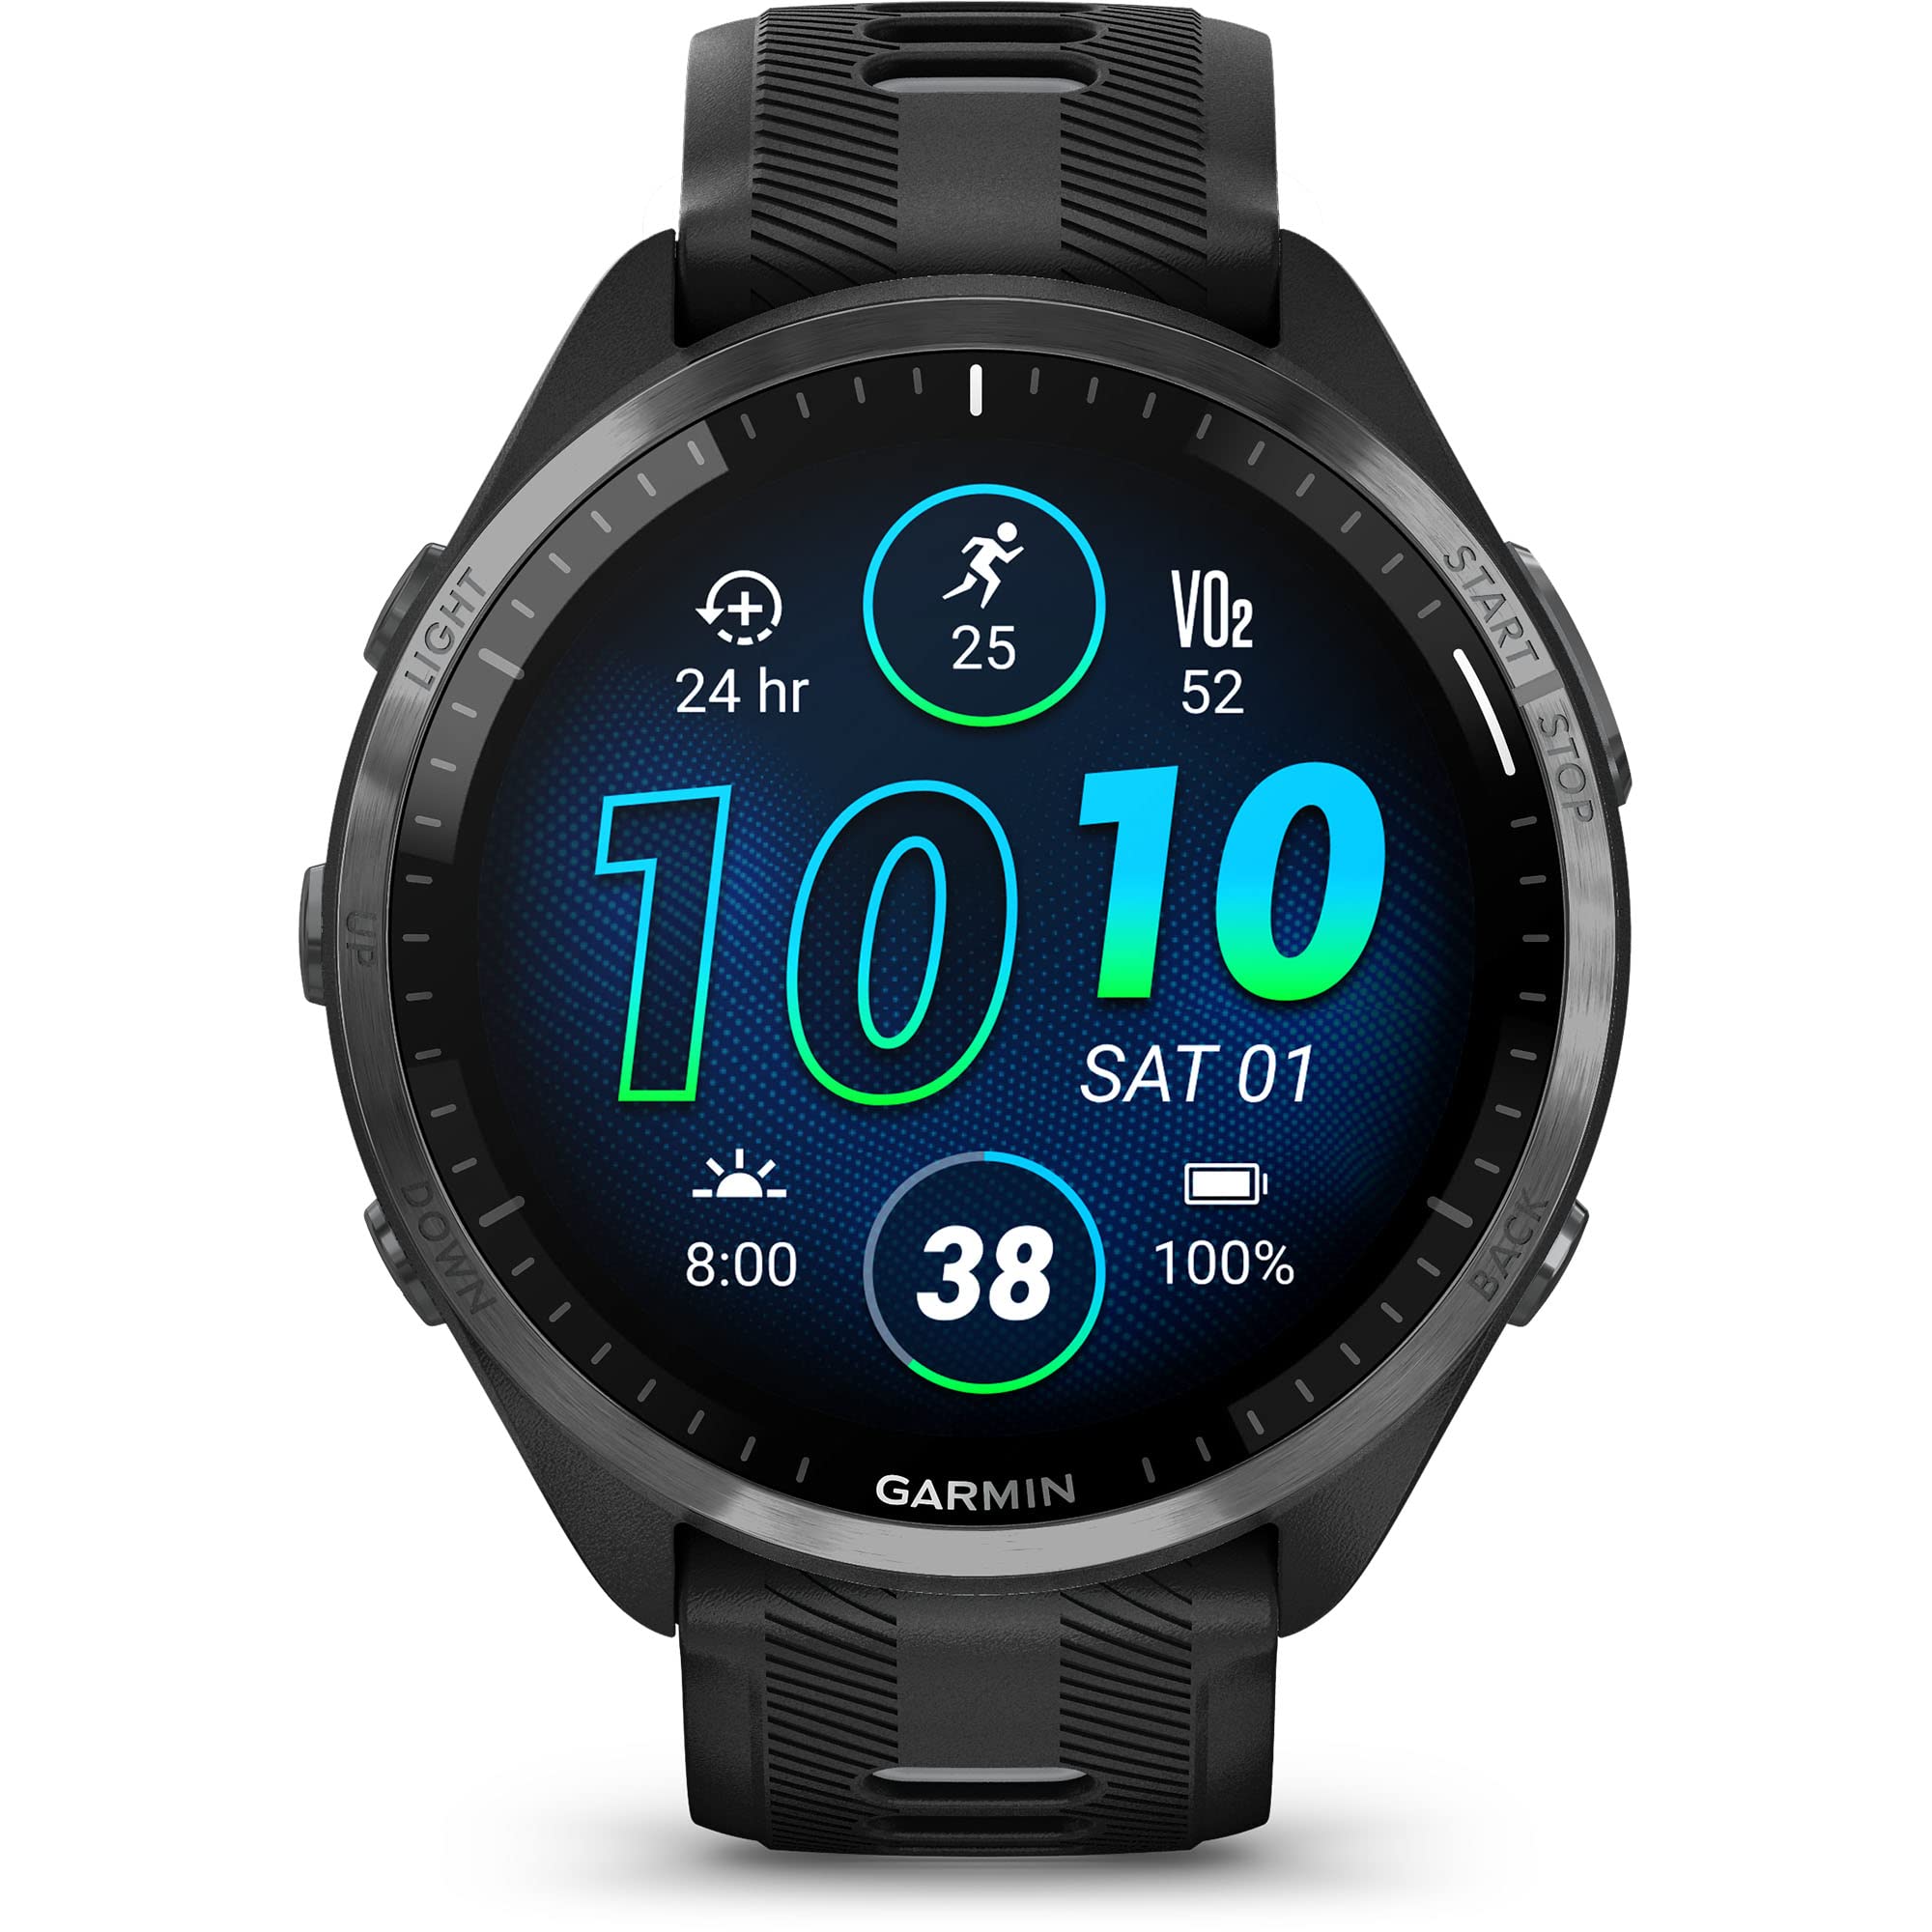 Garmin Forerunner® 965 Running Smartwatch, Colorful AMOLED Display, Training Metrics and Recovery Insights, Black and Powder Gray - image 1 of 5